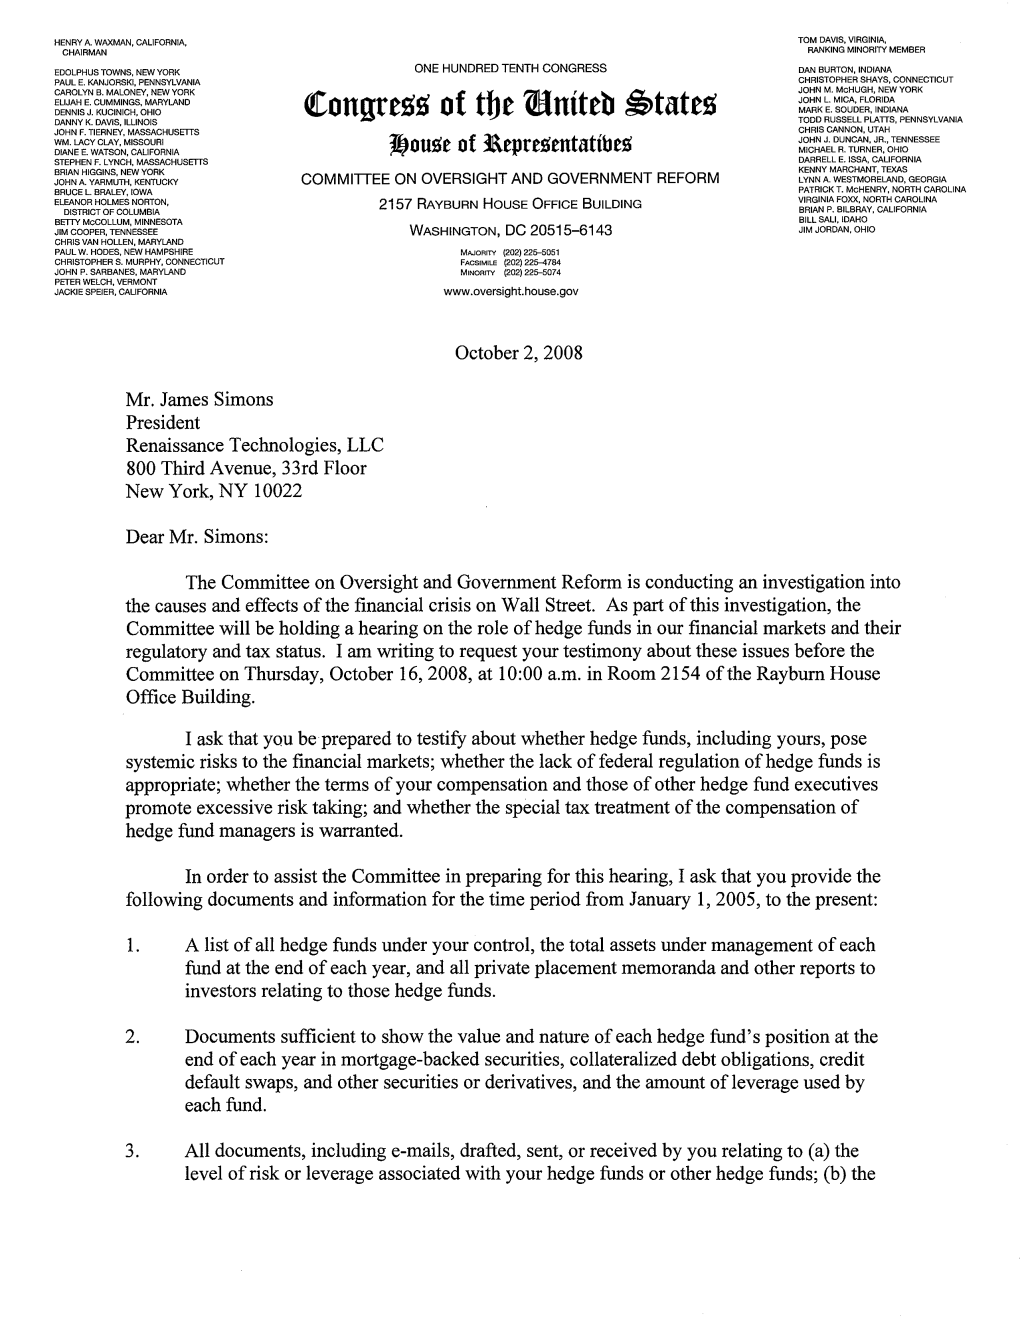 Letter to James Simons Requesting Testimony at Hearing on Financial